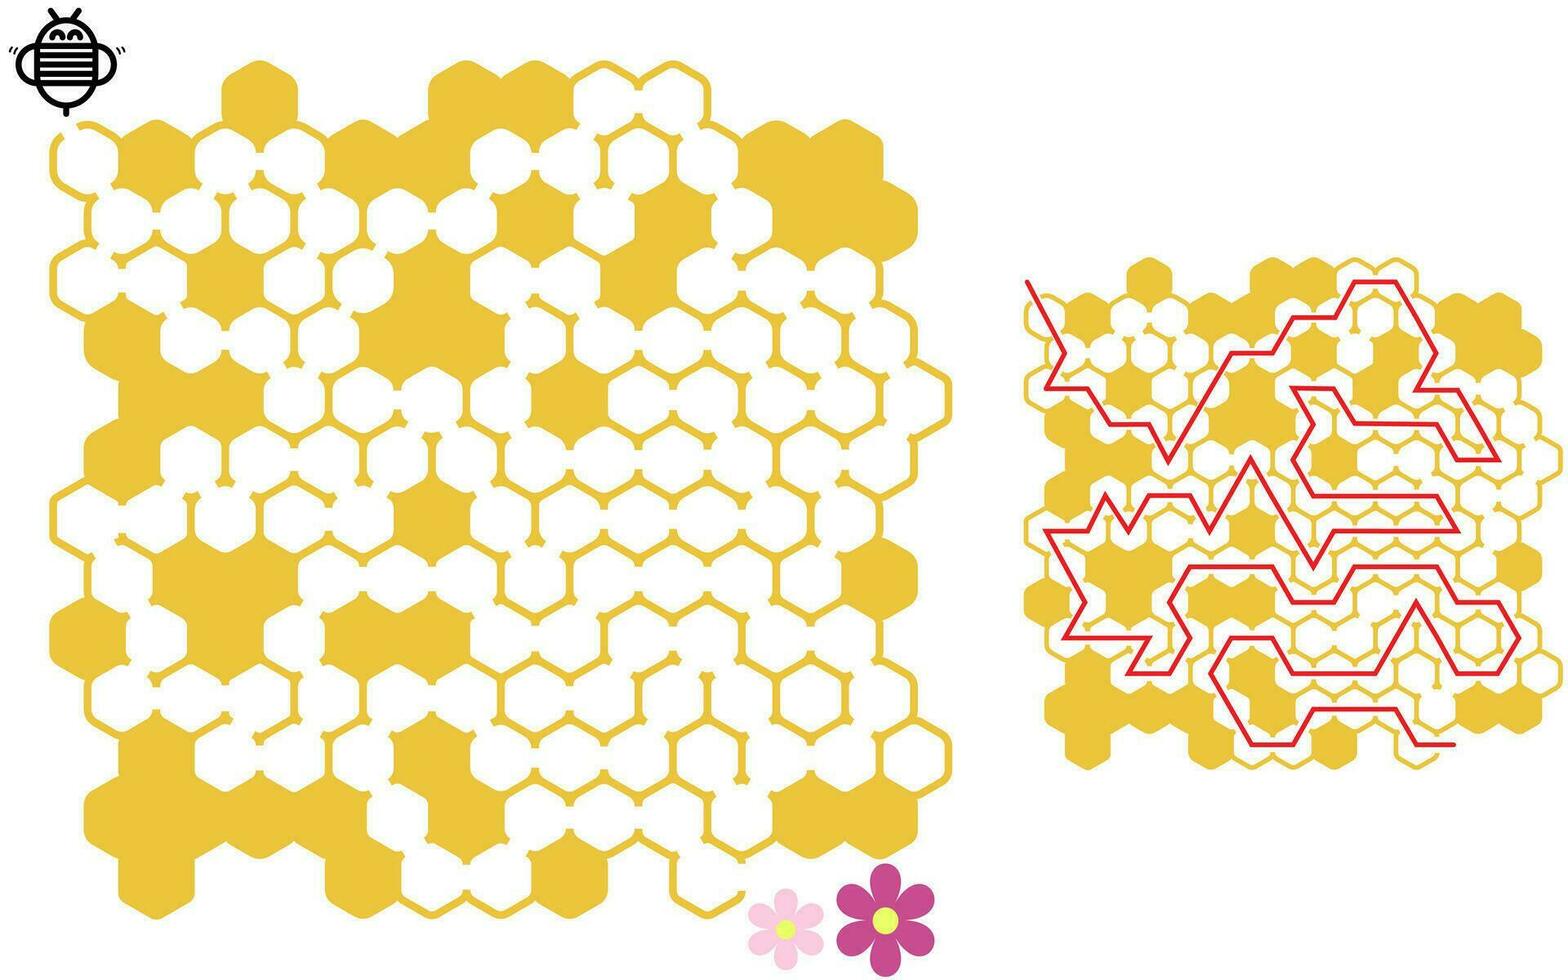 Honeycomb maze puzzle,labyrinth vector illustration for kids